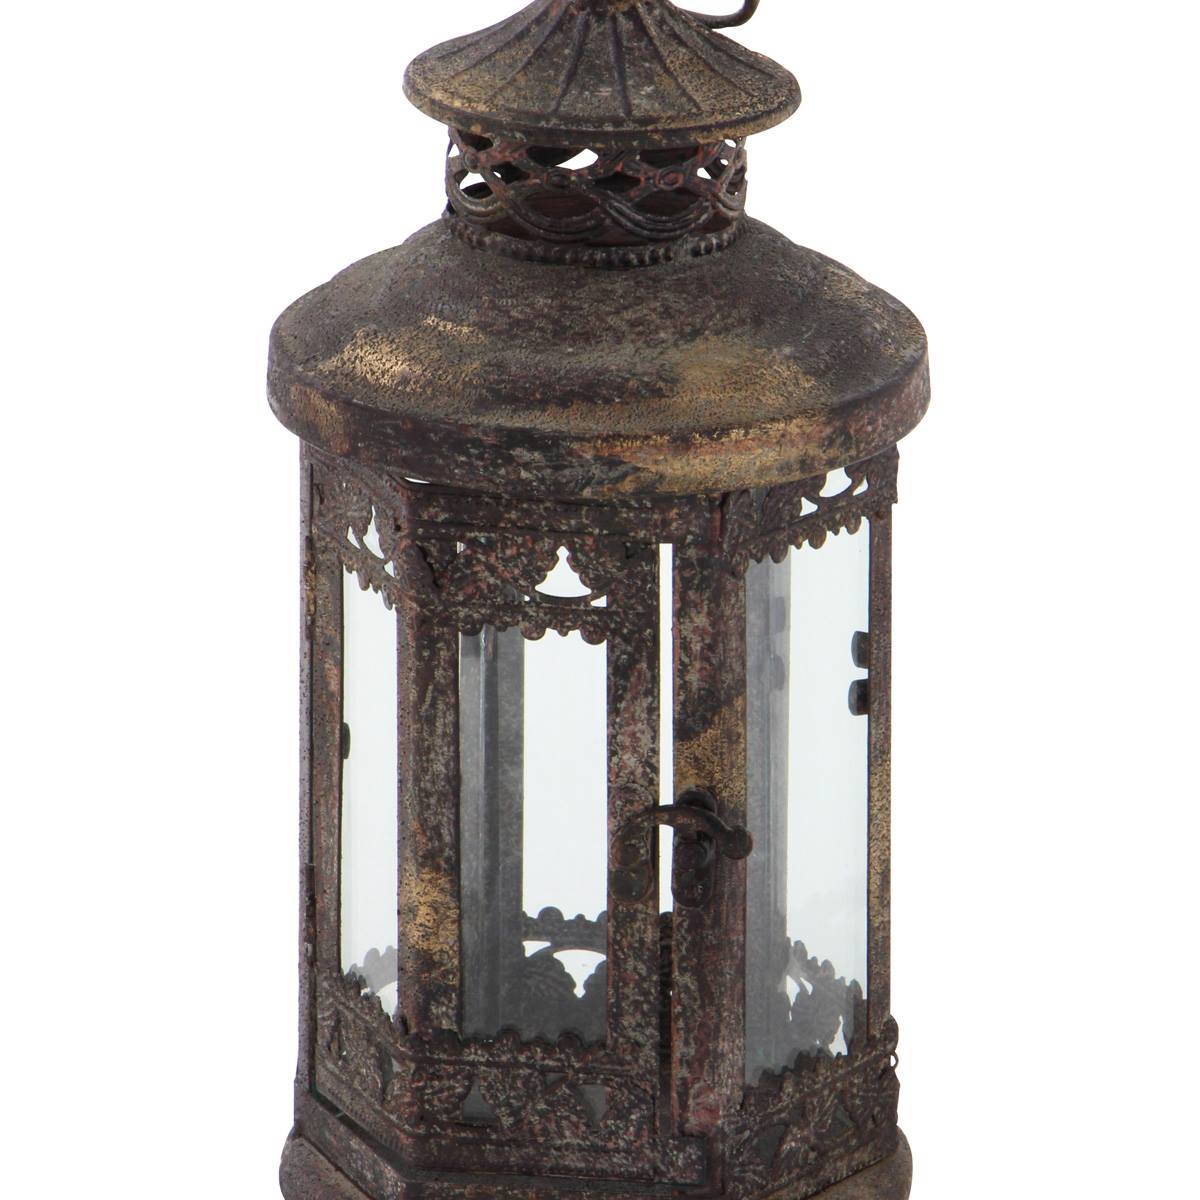 9th & Pike(R) Brown Iron Rustic Votive Candle Holder Lantern